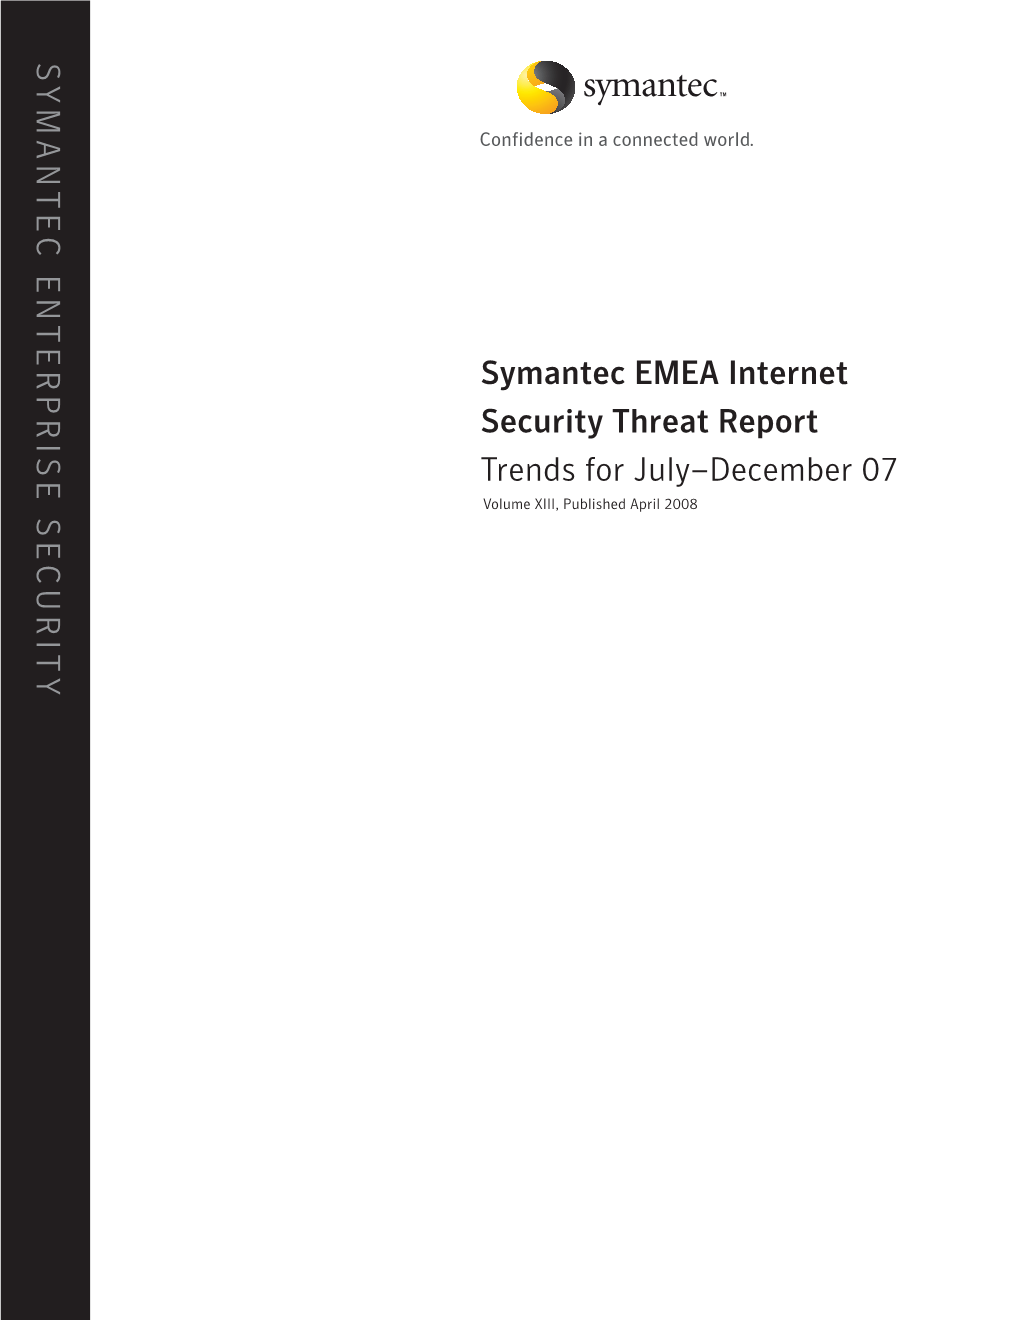 Symantec EMEA Internet Security Threat Report Trends for July